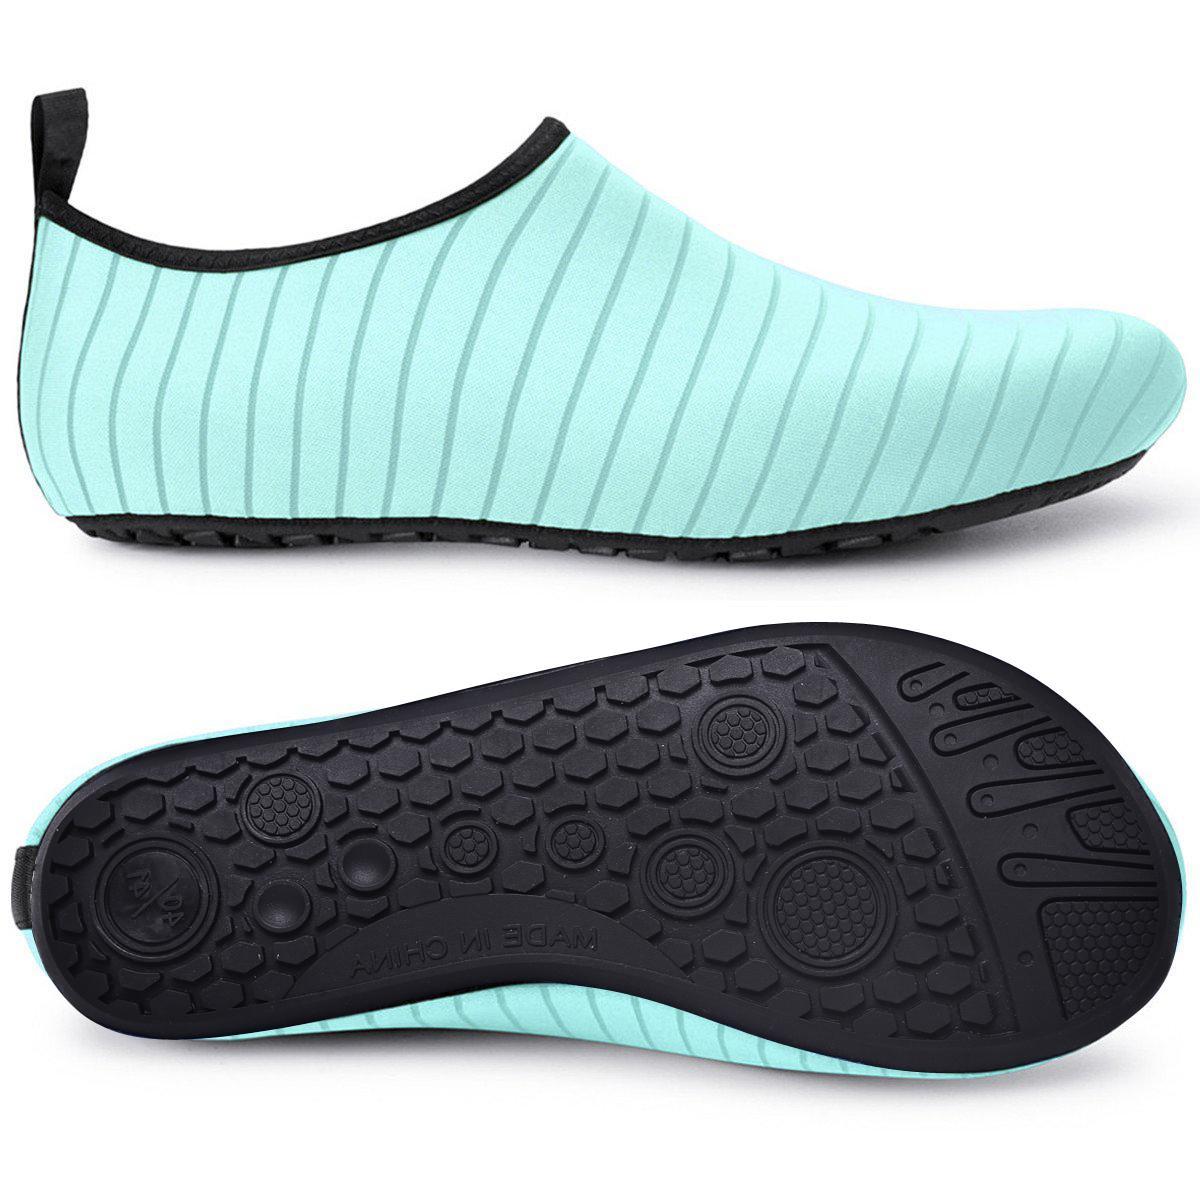 Men's beach shoes, water shoes, swimming shoes